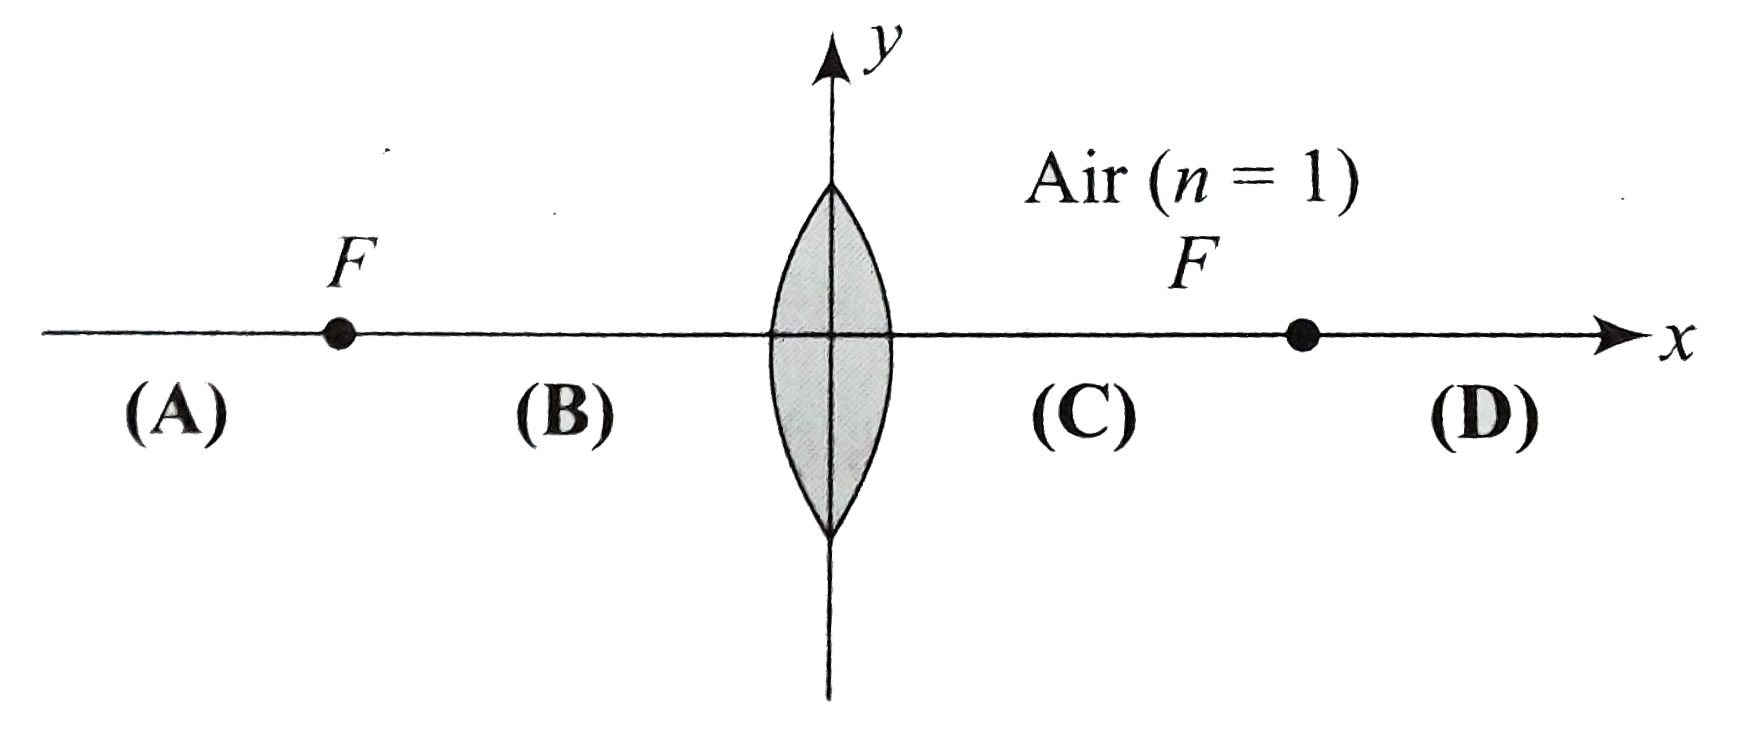 This question concerns a symmetrical lens shown, along with its two focal points. It is made of plastic with n=1.2 and has focal length f. Four different regions are shown:   A. -oo lt x lt -f     B.  -f lt x lt 0   C. 0 lt x lt f    D. f lt x lt oo    A second lens is now placed adjacent to the first in contact with it. The new lens is concave, with a focal length f=-3f. In what region does the focal length of the two-lens system lie? Treat the lenses as thin.